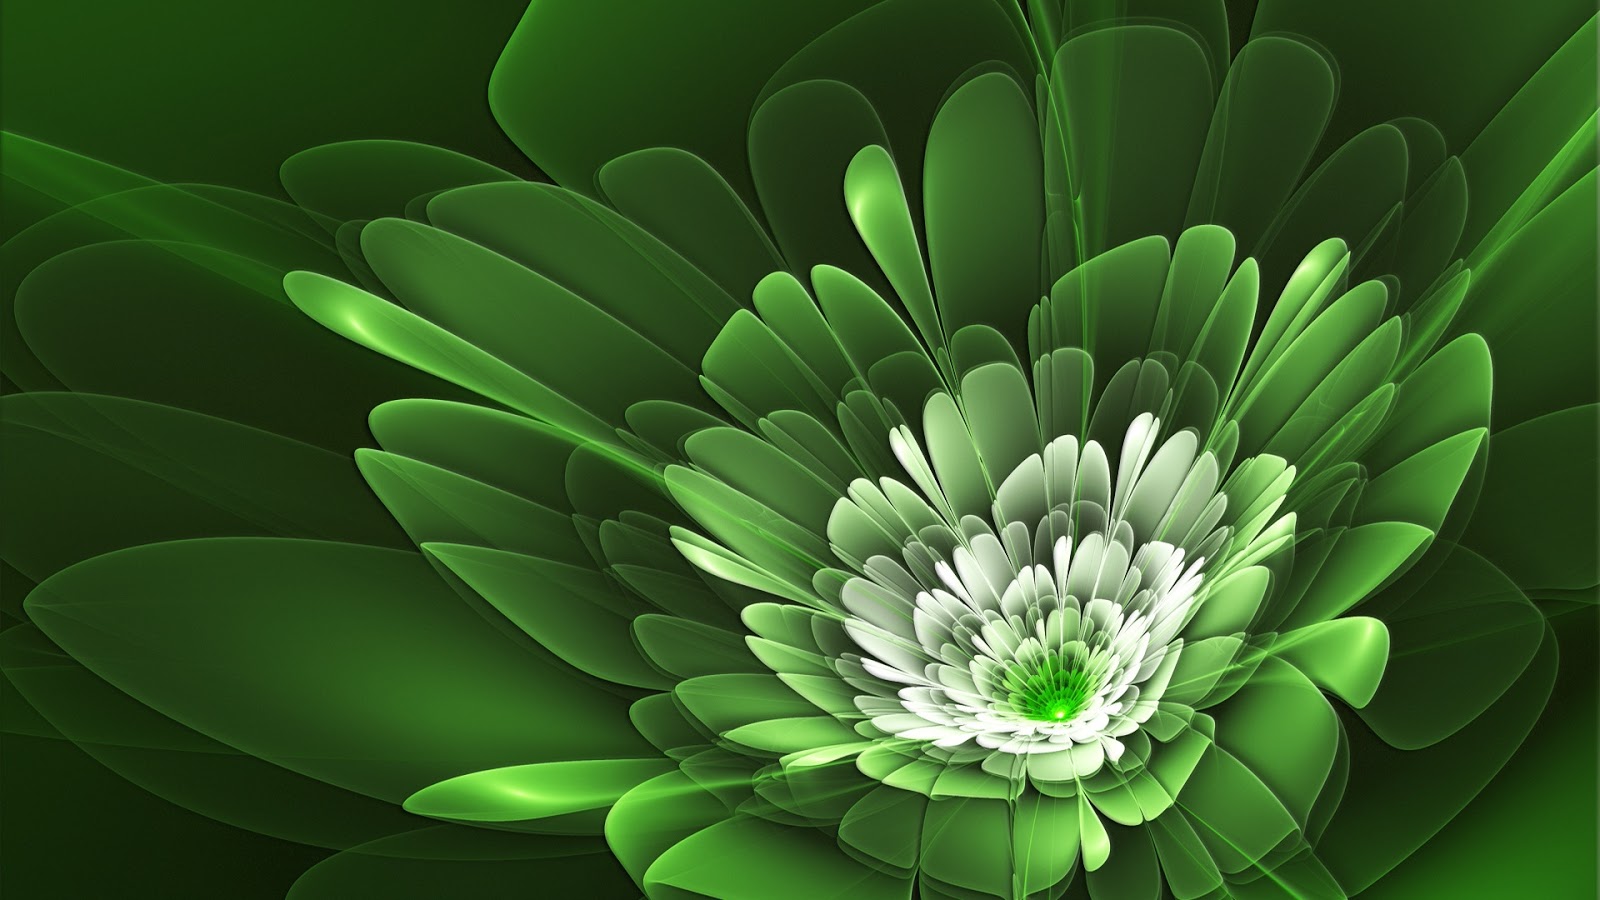 Puter Wallpaper 3d Synthesis Of For The Best